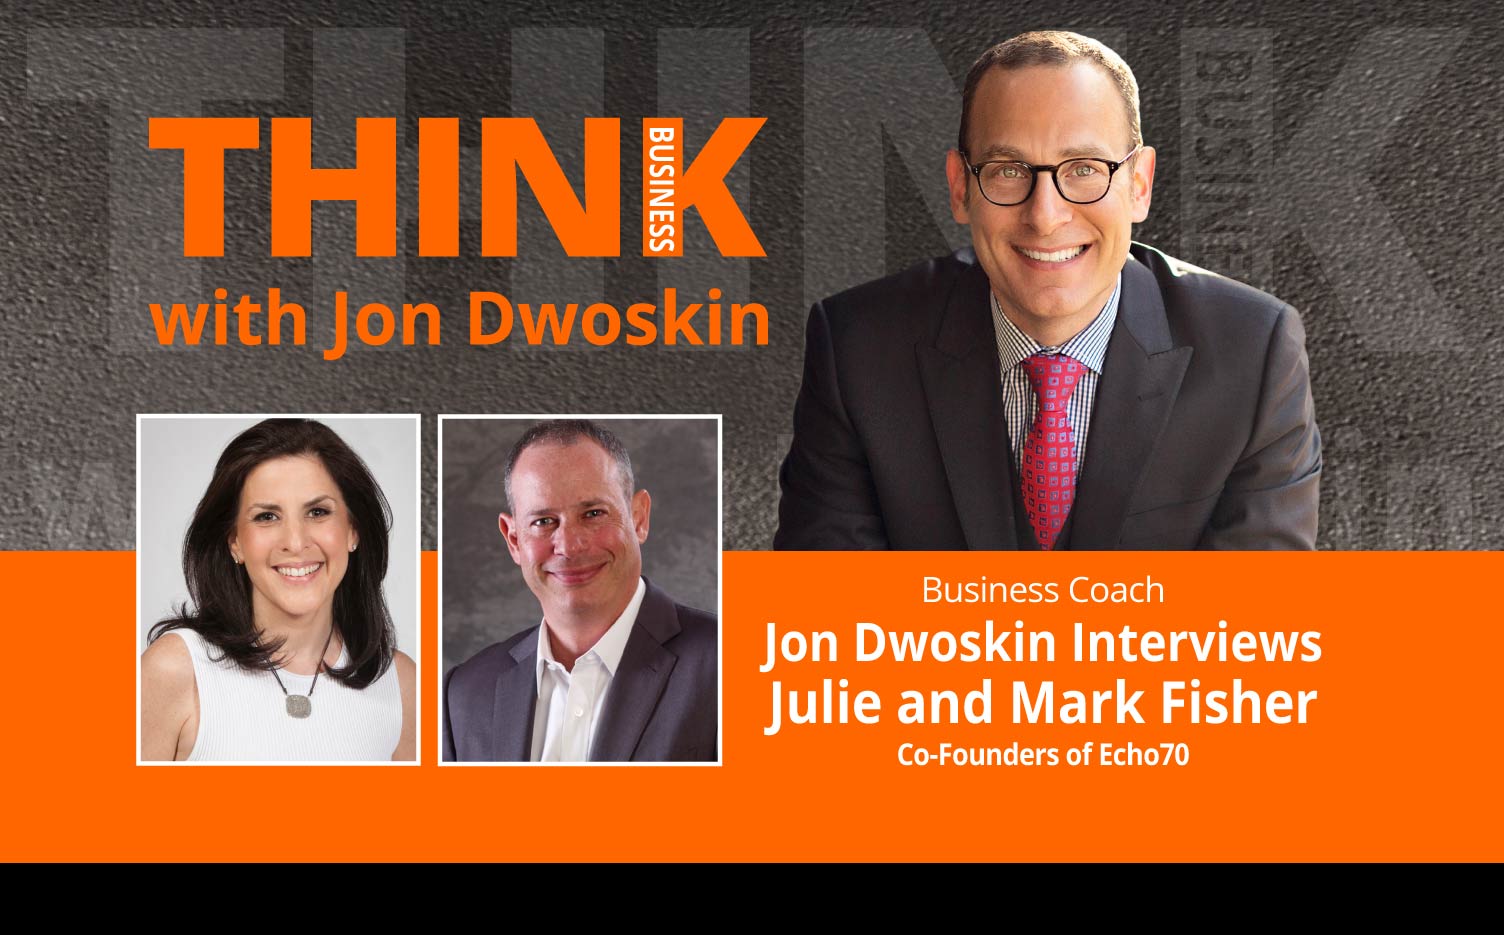 THINK Business Podcast: THINK Business Podcast: Jon Dwoskin Interviews Julie and Mark Fisher, Co-Founders of Echo70